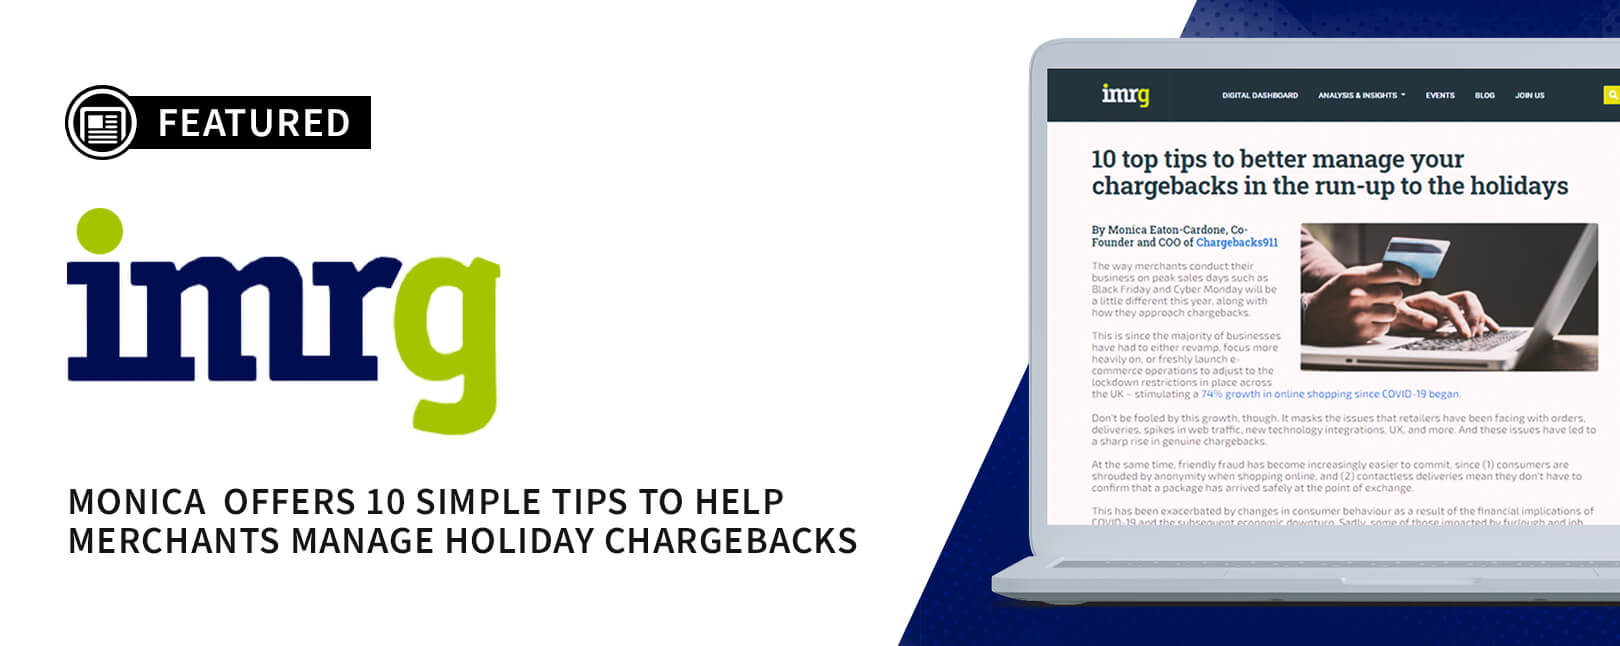 10 Top Tips to Manage Chargebacks in the Run-Up to the Holidays